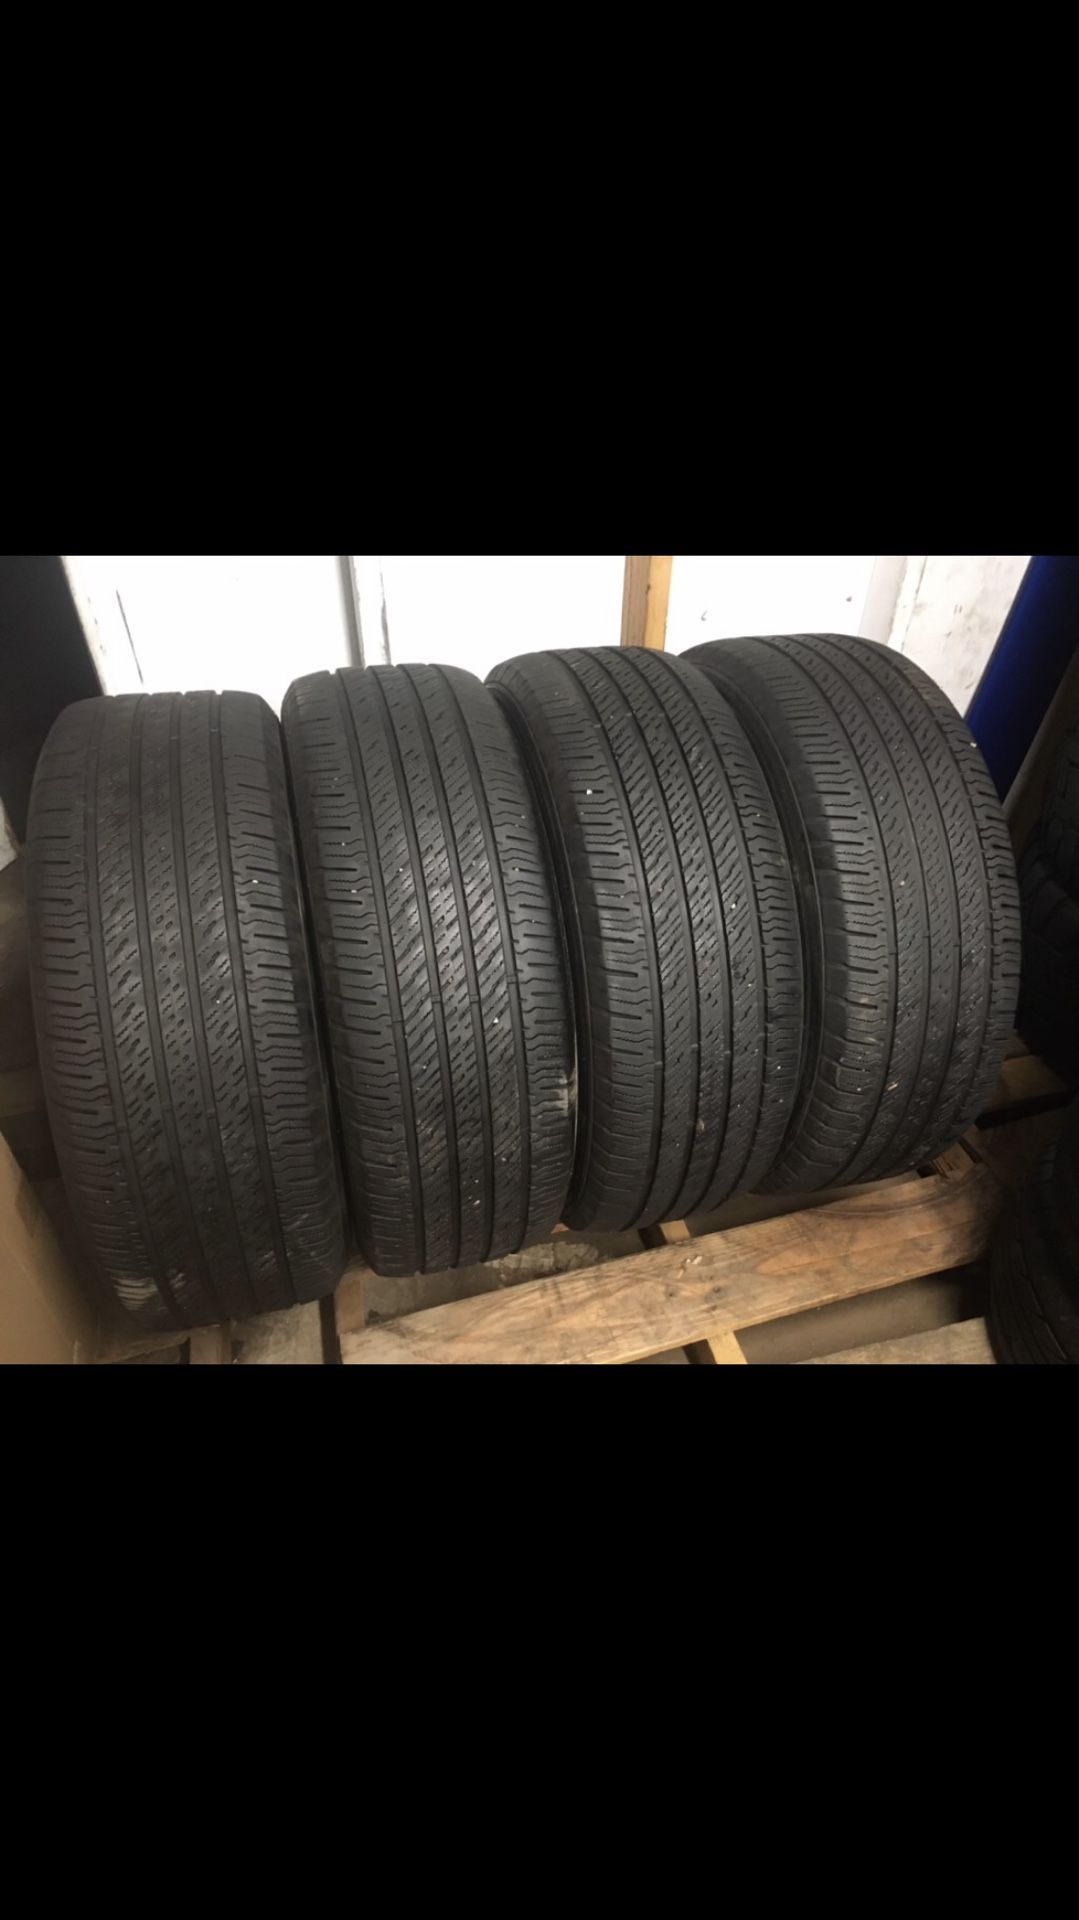 (4) P265-60R18 tires hankook suv or truck